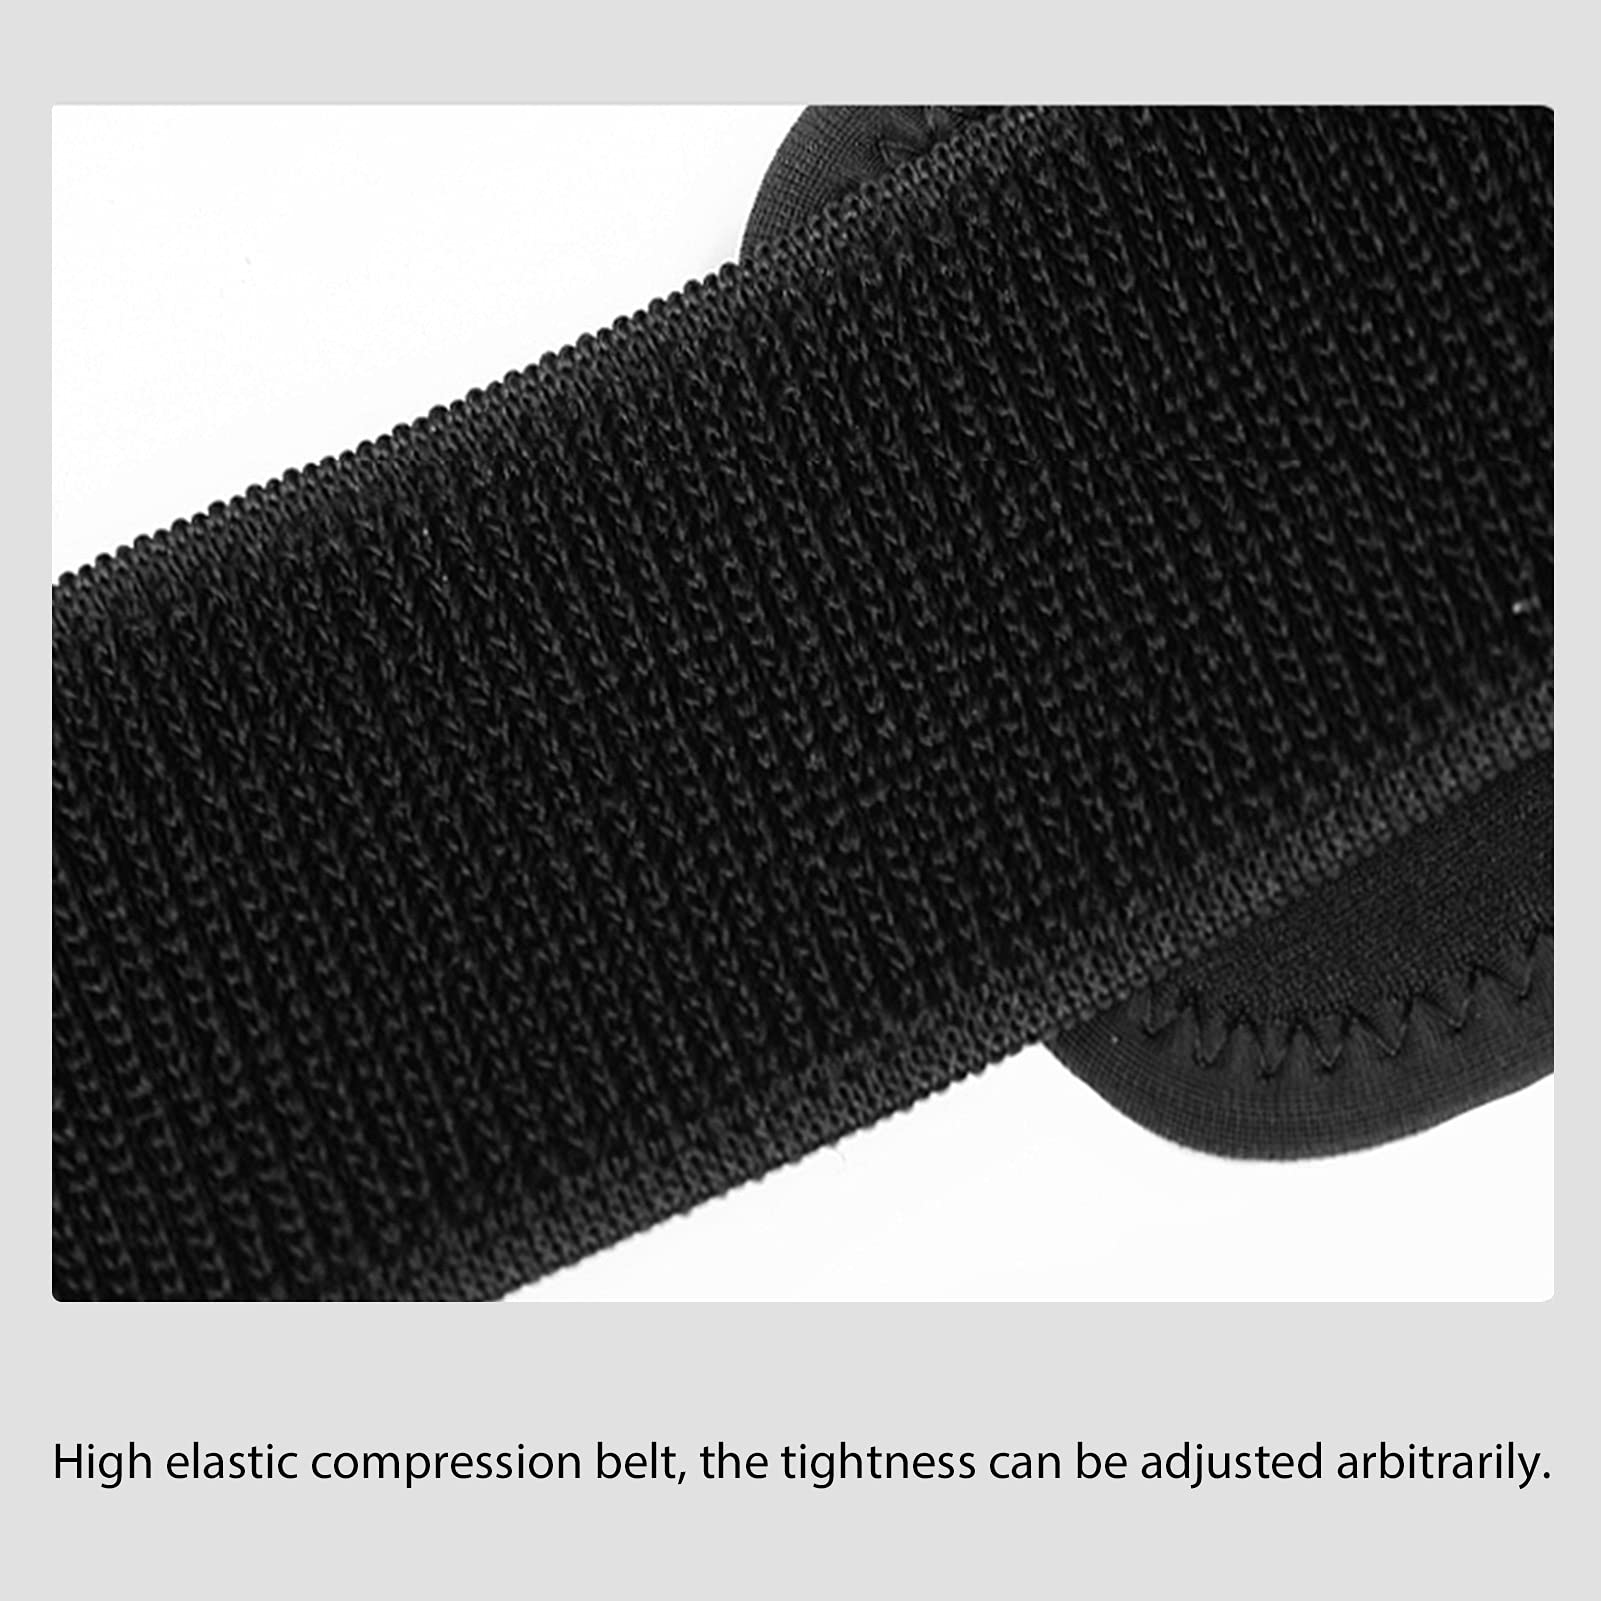 2 Pack Wrist Straps for Weightlifting Men,Wristbands Support,Tennis Wrist Support,Adjustable Wrist Wraps for Carpal Tunnel,Wrist Brace for Working Out,Pain Relief,Non-pilling,High Elasticity